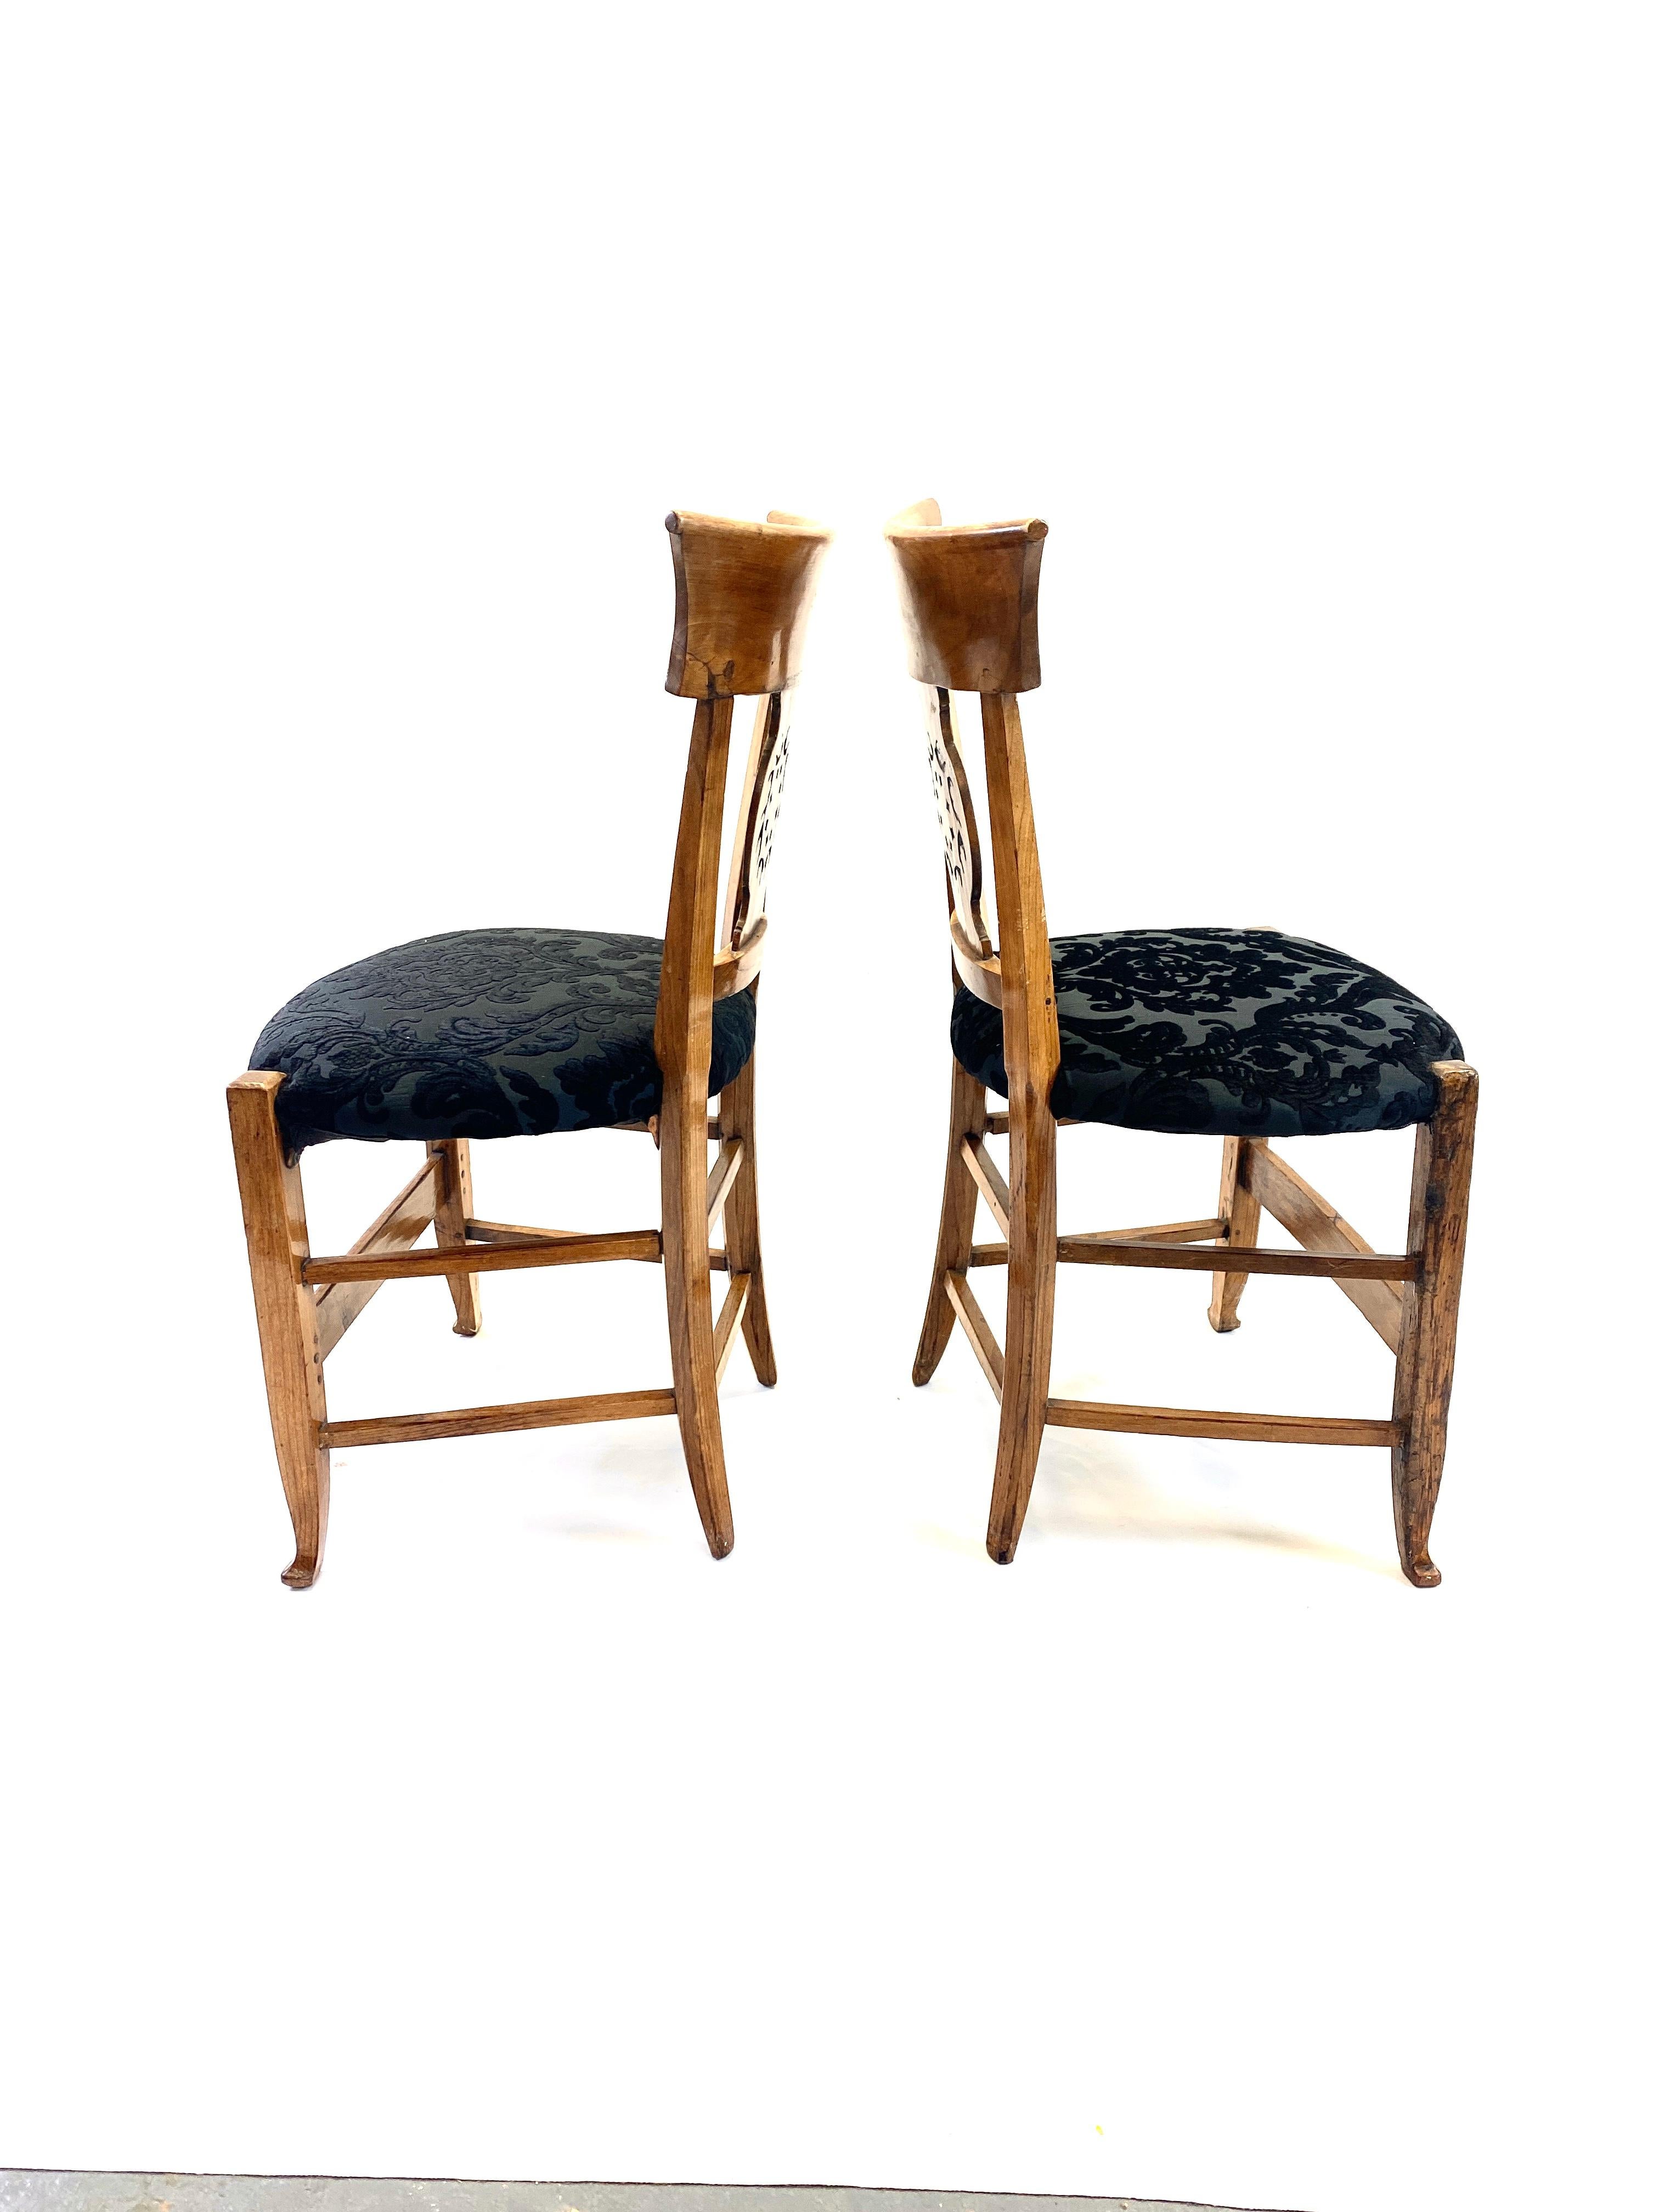 Hand-Carved Pair of 19th Century Biedermeier Walnut Chairs For Sale